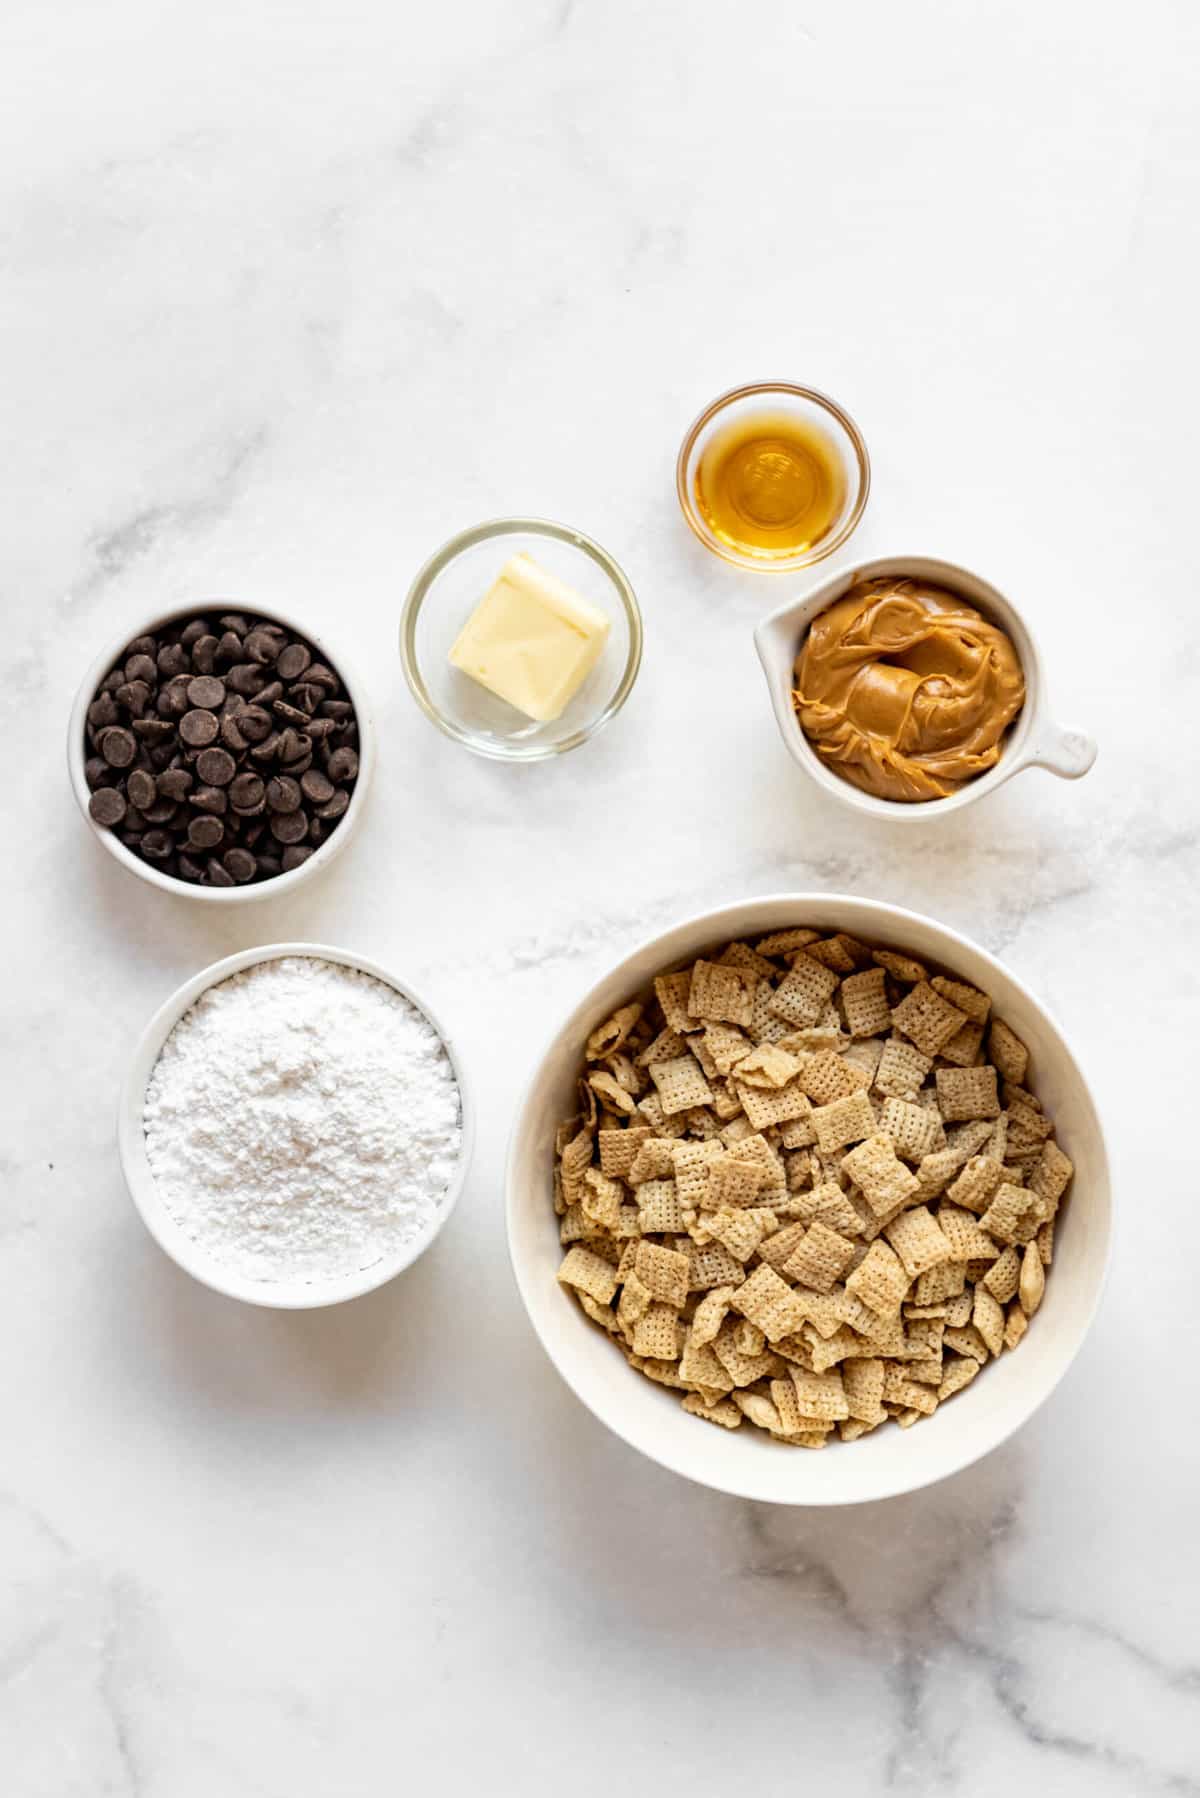 An overhead image of the ingredients for muddy buddies in various bowls.